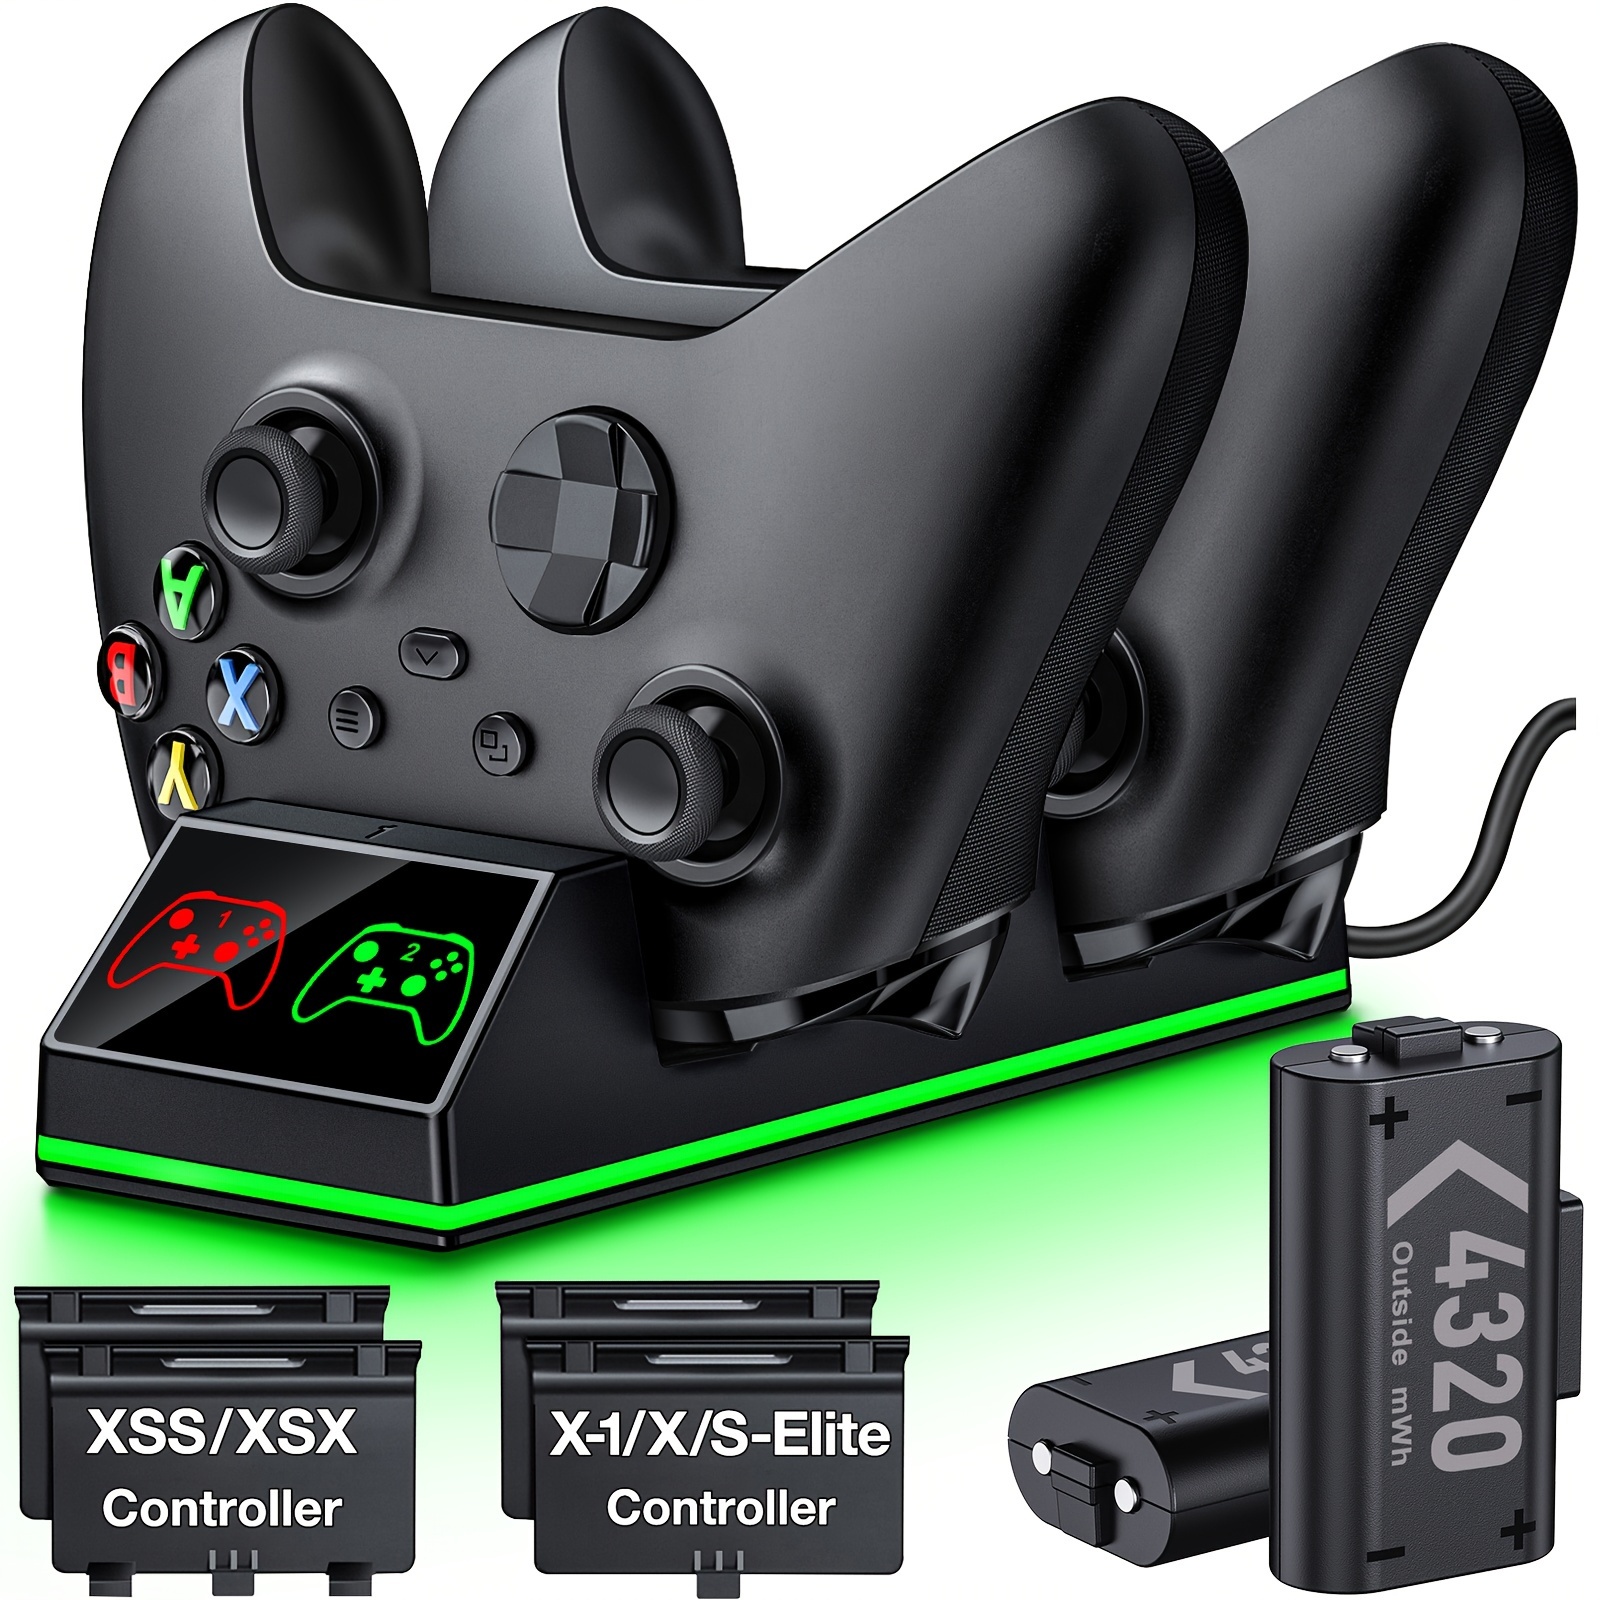 

Controller Charger For One, Controller Charging Station With 2 X 4320mwh Rechargeable Battery Packs For Series X/s/one X/s/elite